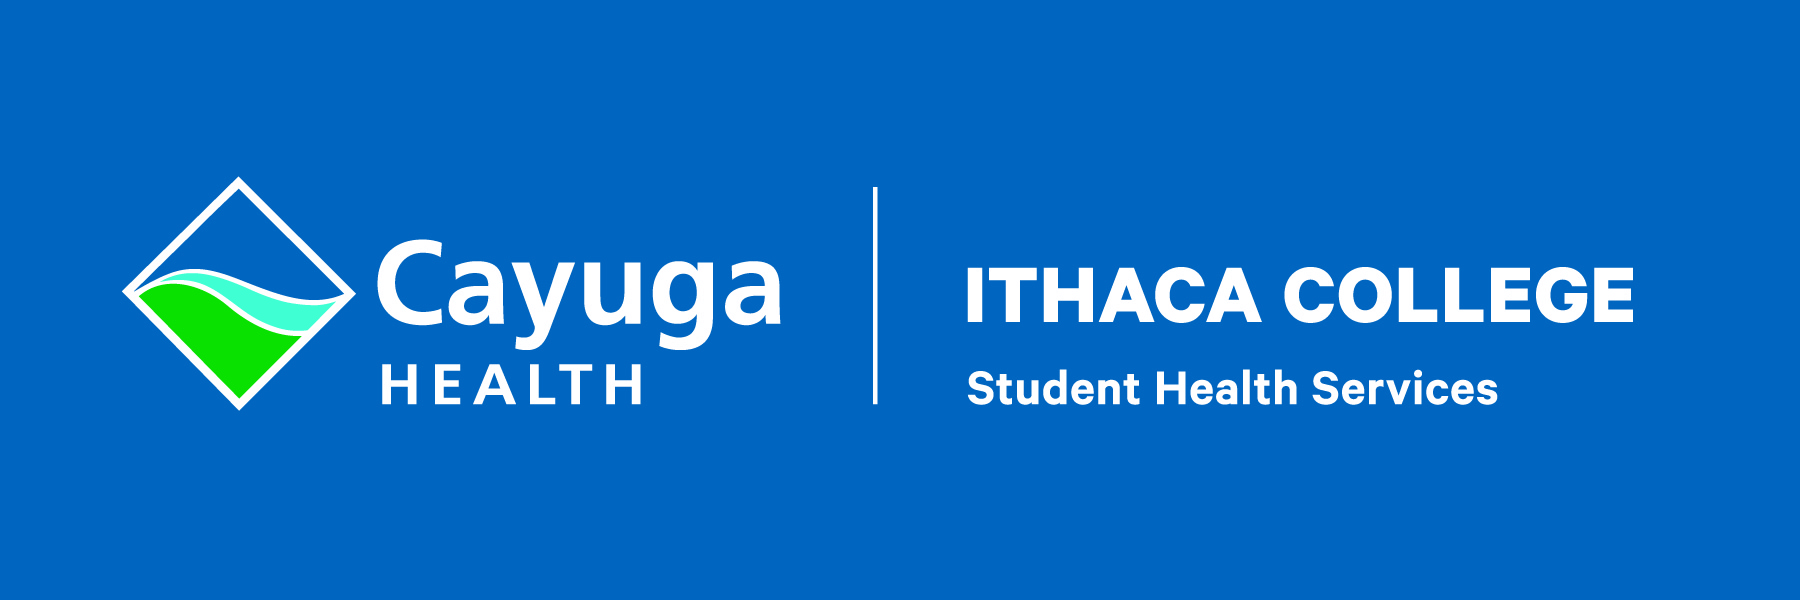 Ithaca College Partners with Cayuga Health to Support Student Health  Services